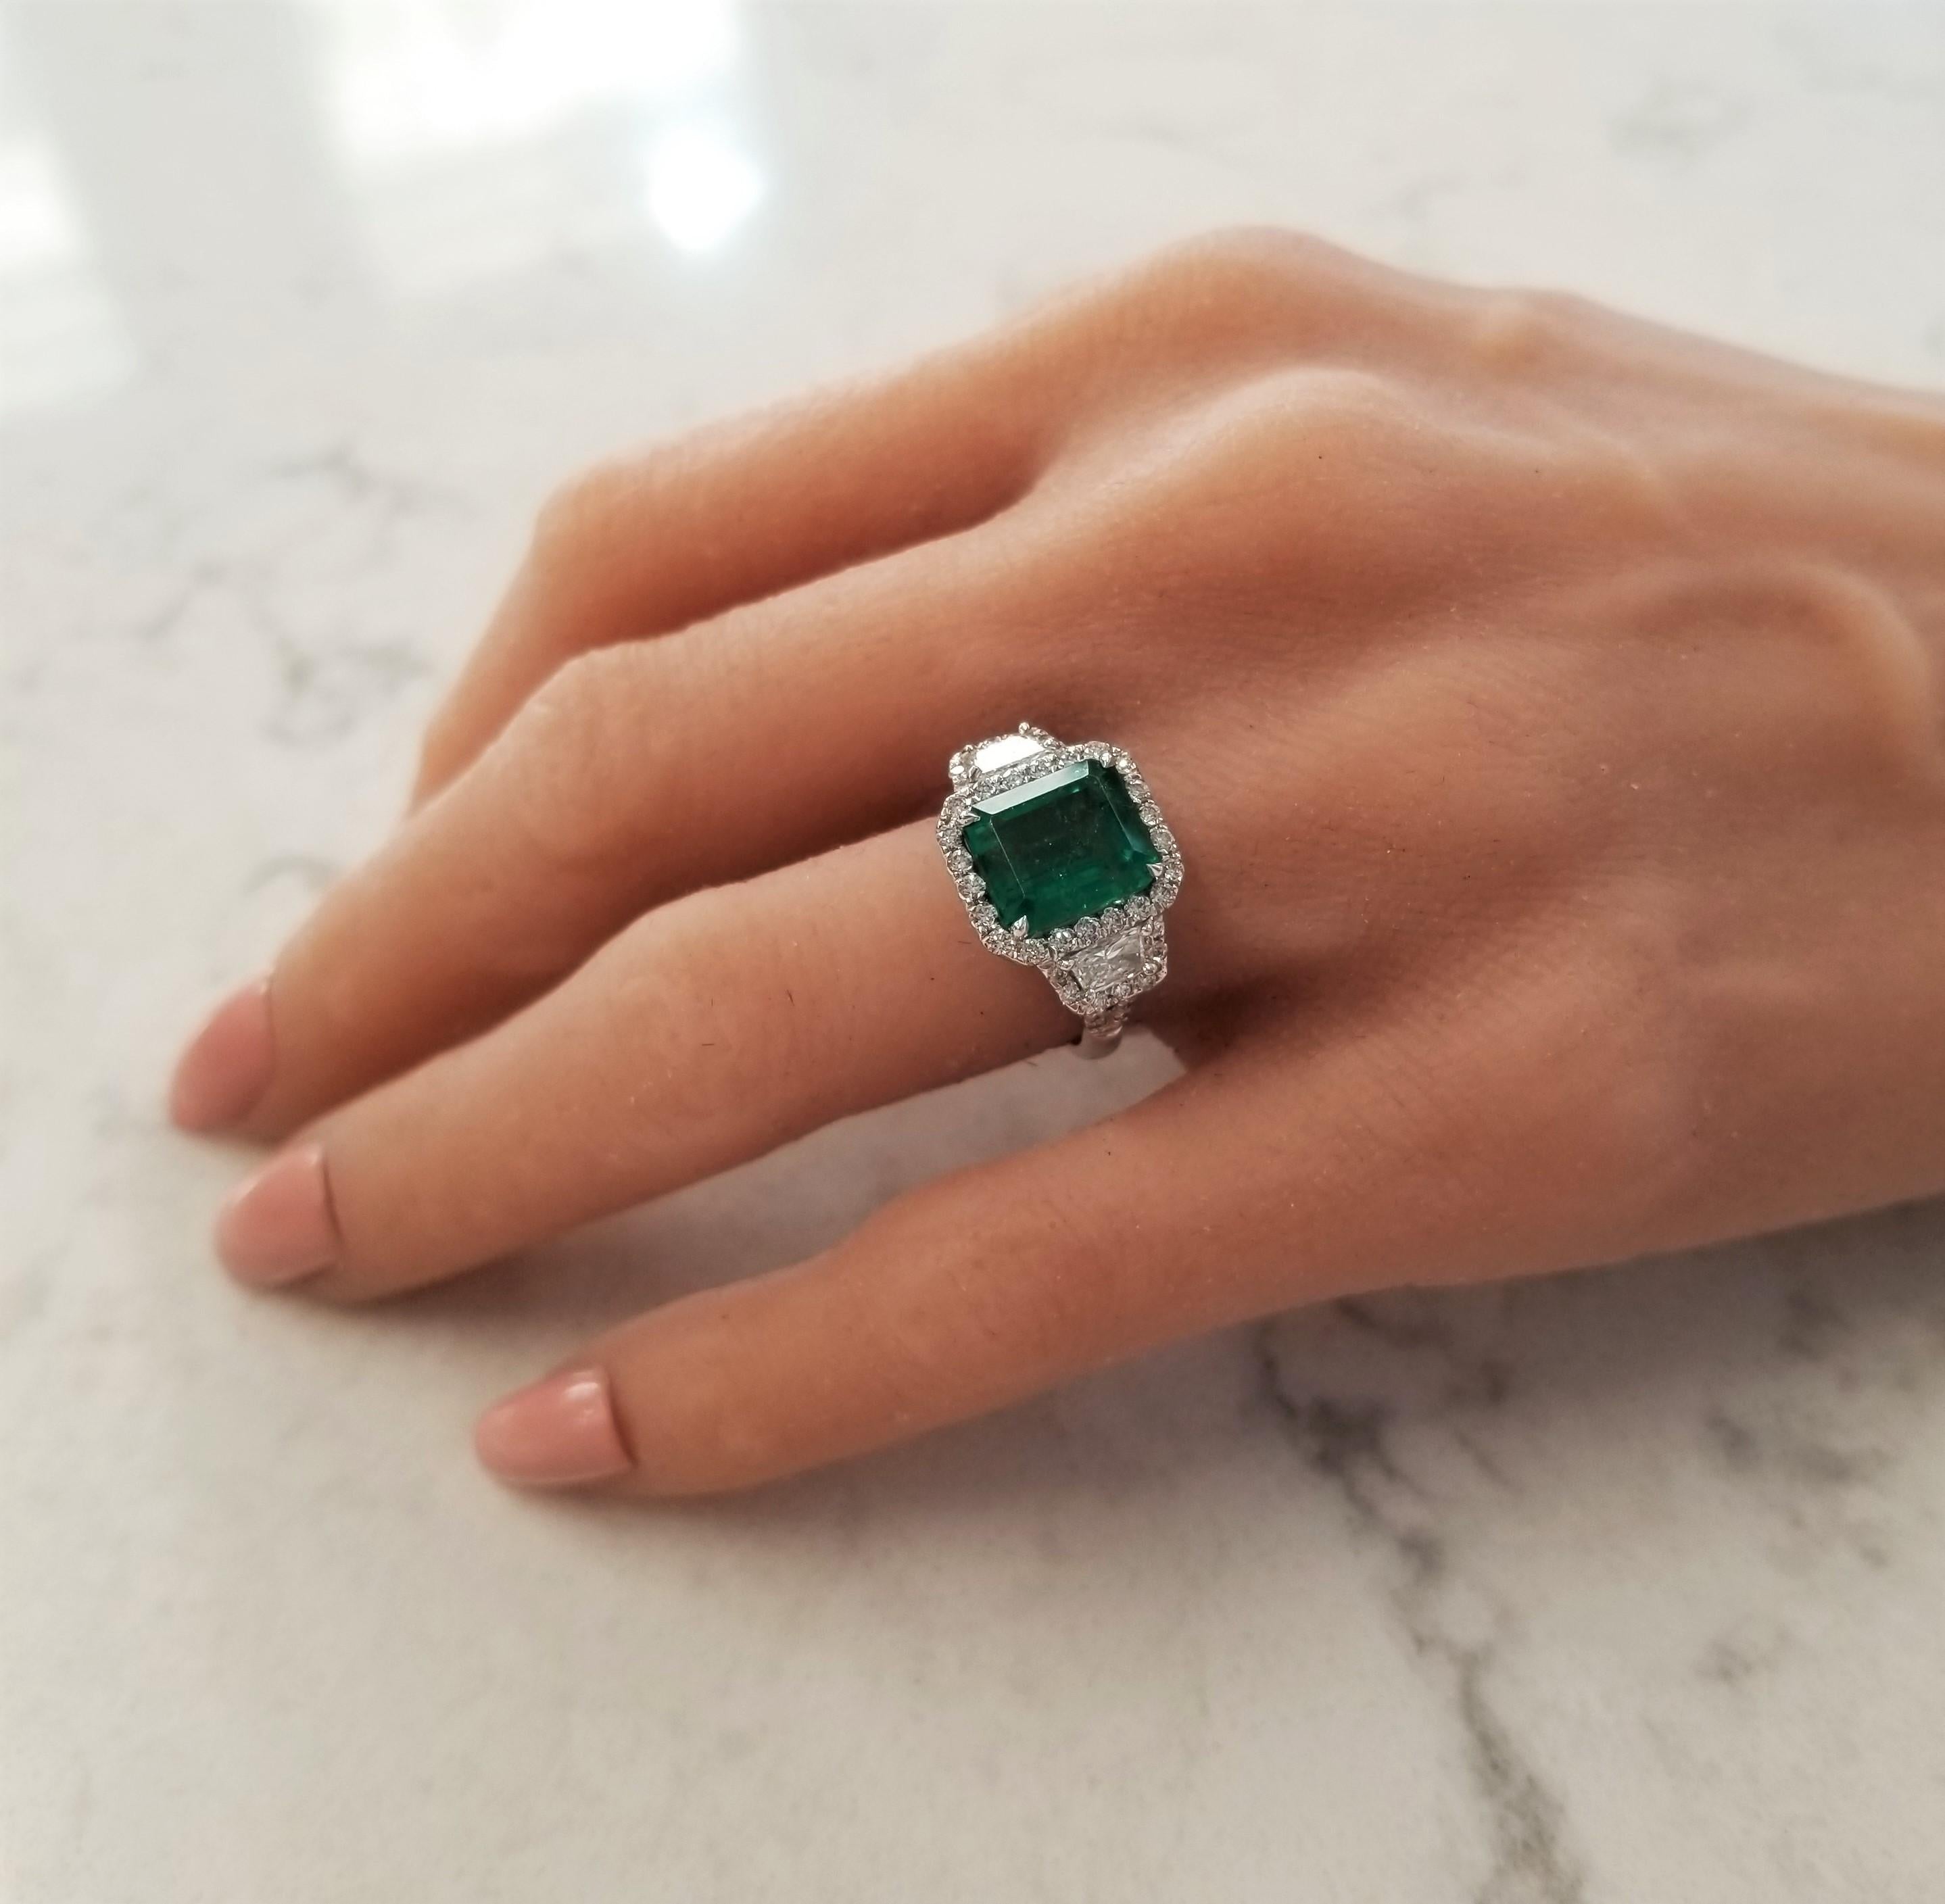 This beautiful 4.11 carat, emerald step-cut emerald is the spotlight. This emerald is from Brazil; its transparency is excellent, color is vibrant. This stellar three-stone ring is paired with 0.48 carats of trapezoid diamonds and glittering with an